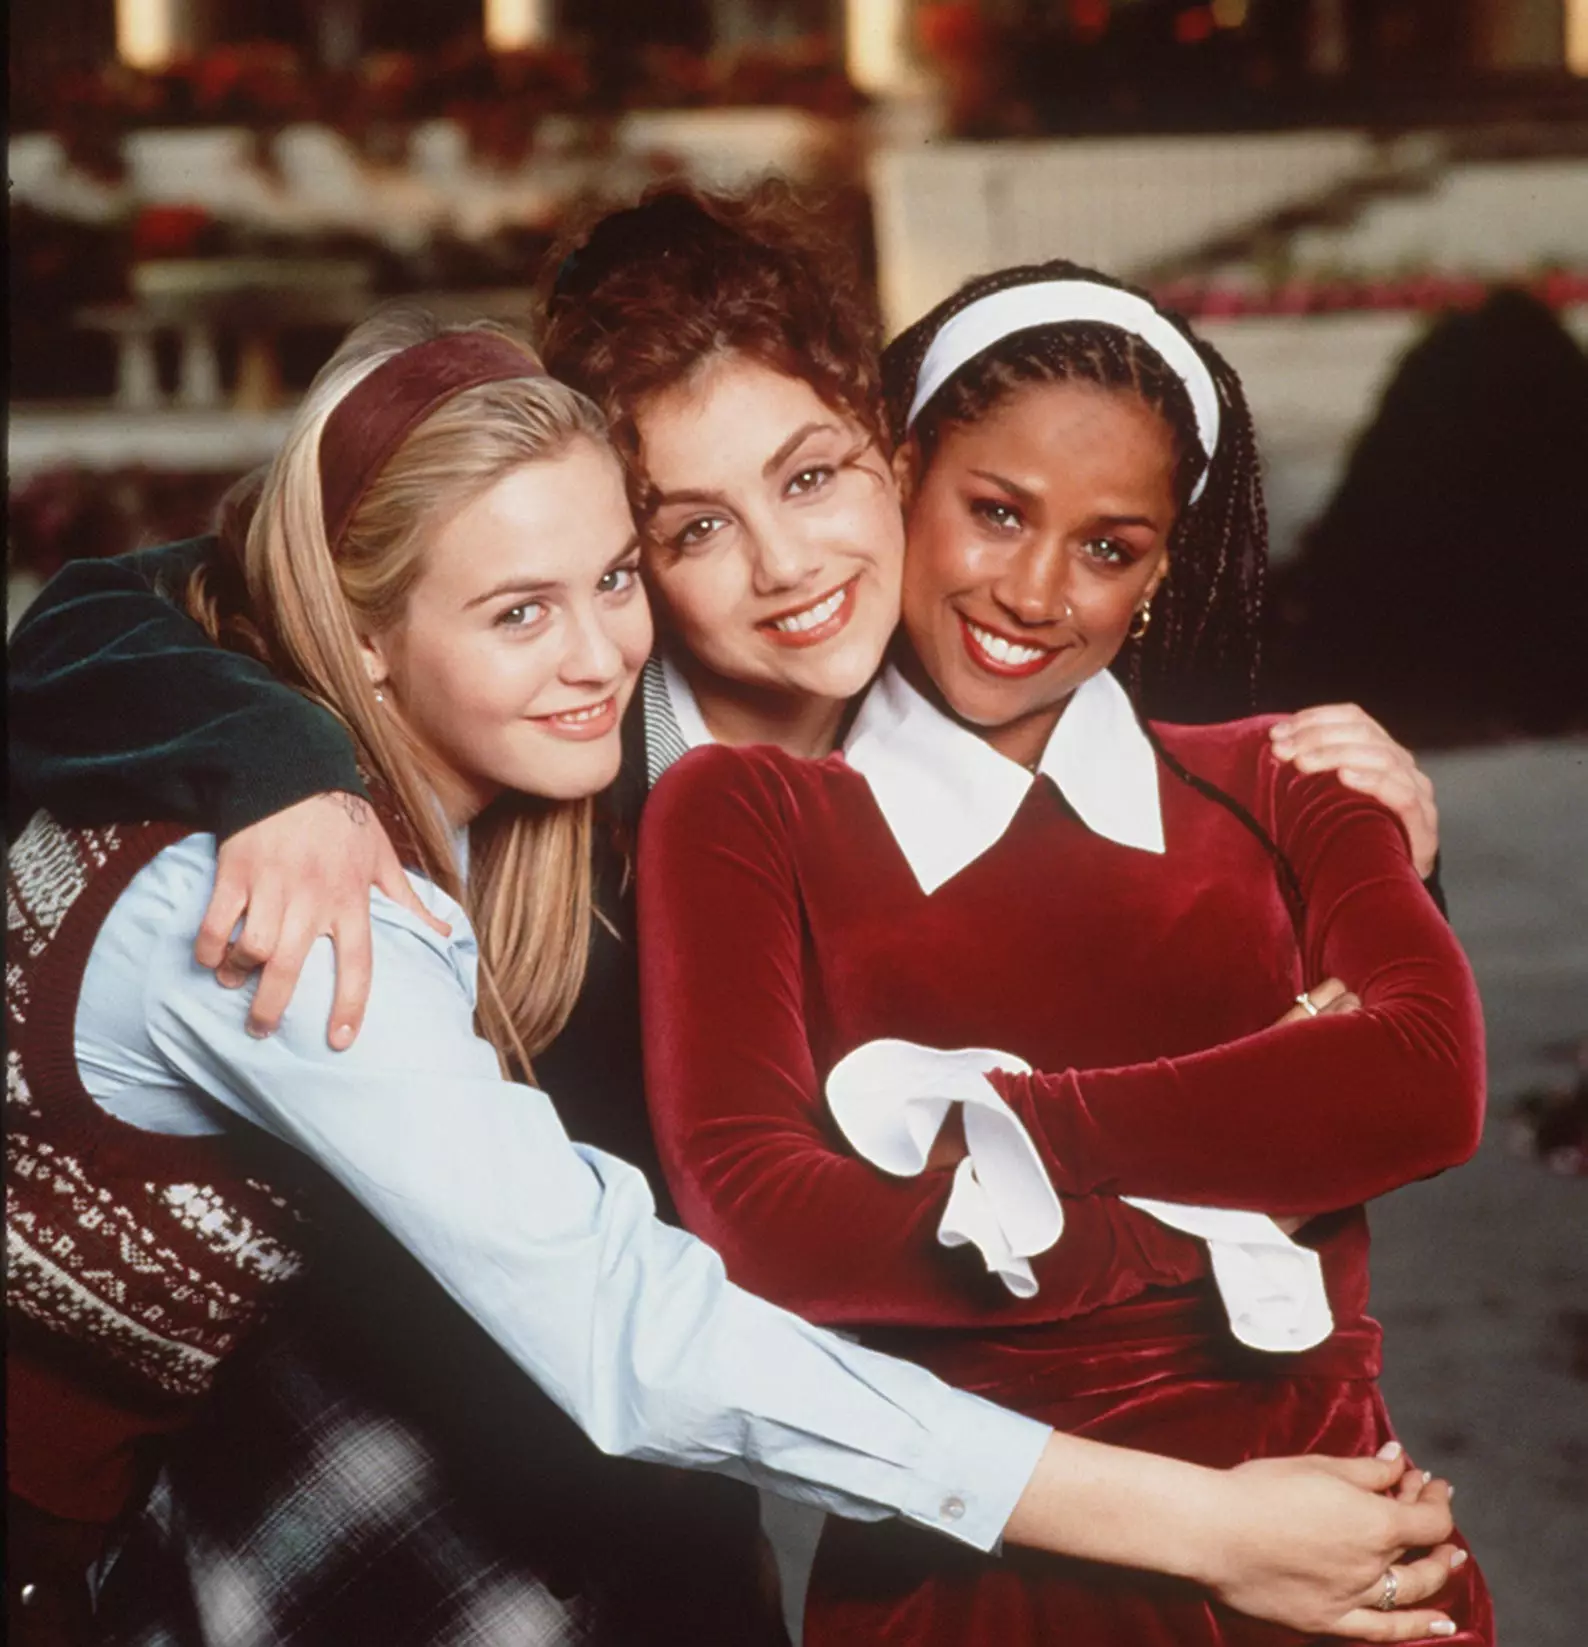 'Clueless' starred Alicia Silverstone, Brittany Murphy and Stacey Dash (